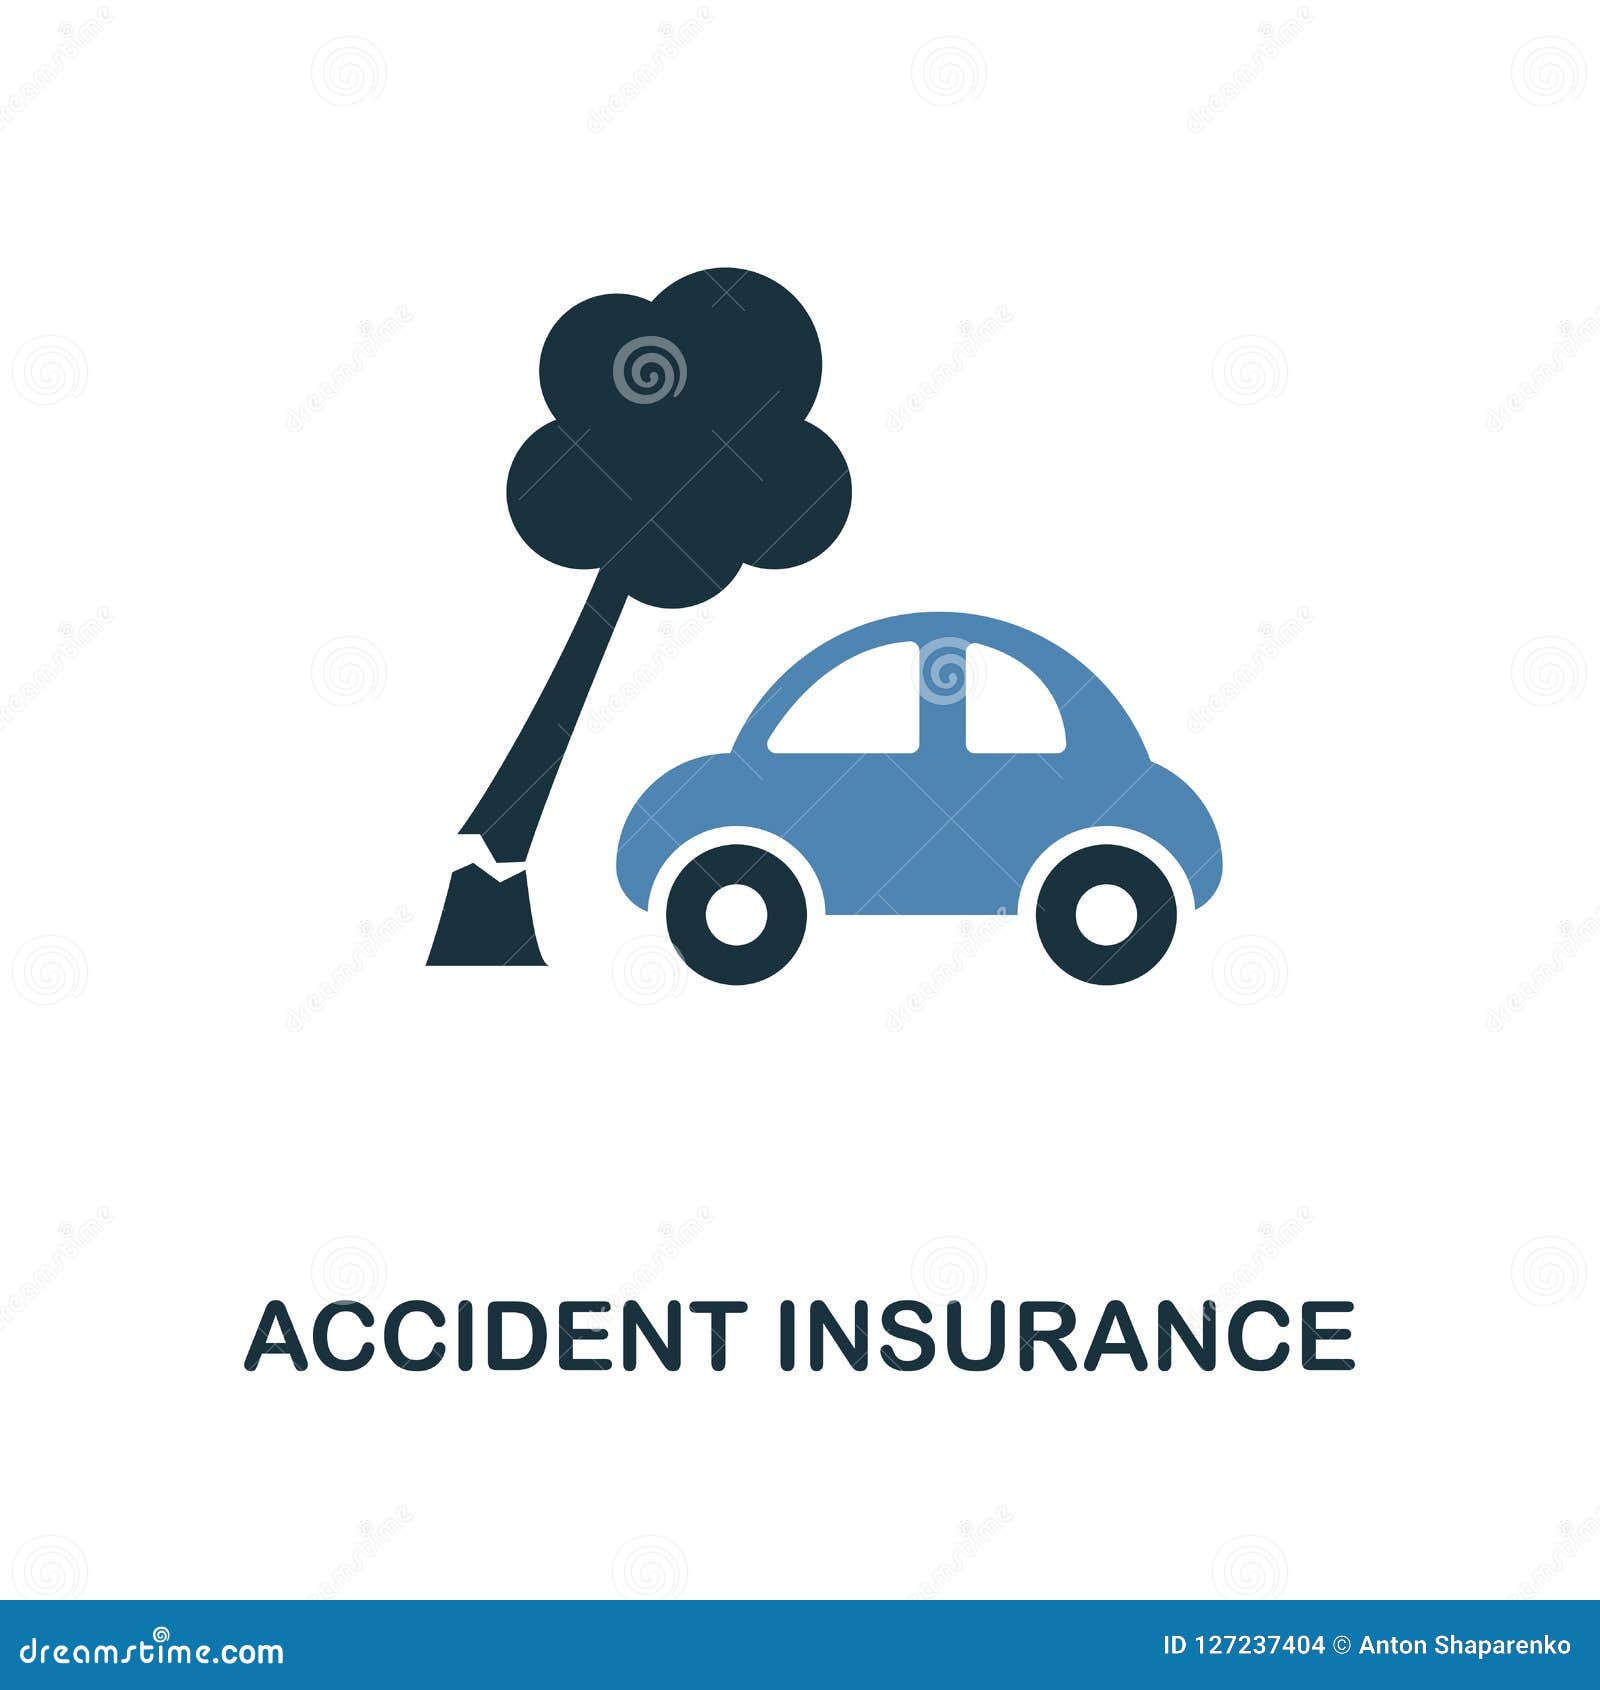 accident insurance icon in two color . line style icon from insurance icon collection. ui and ux. pixel perfect premium acci